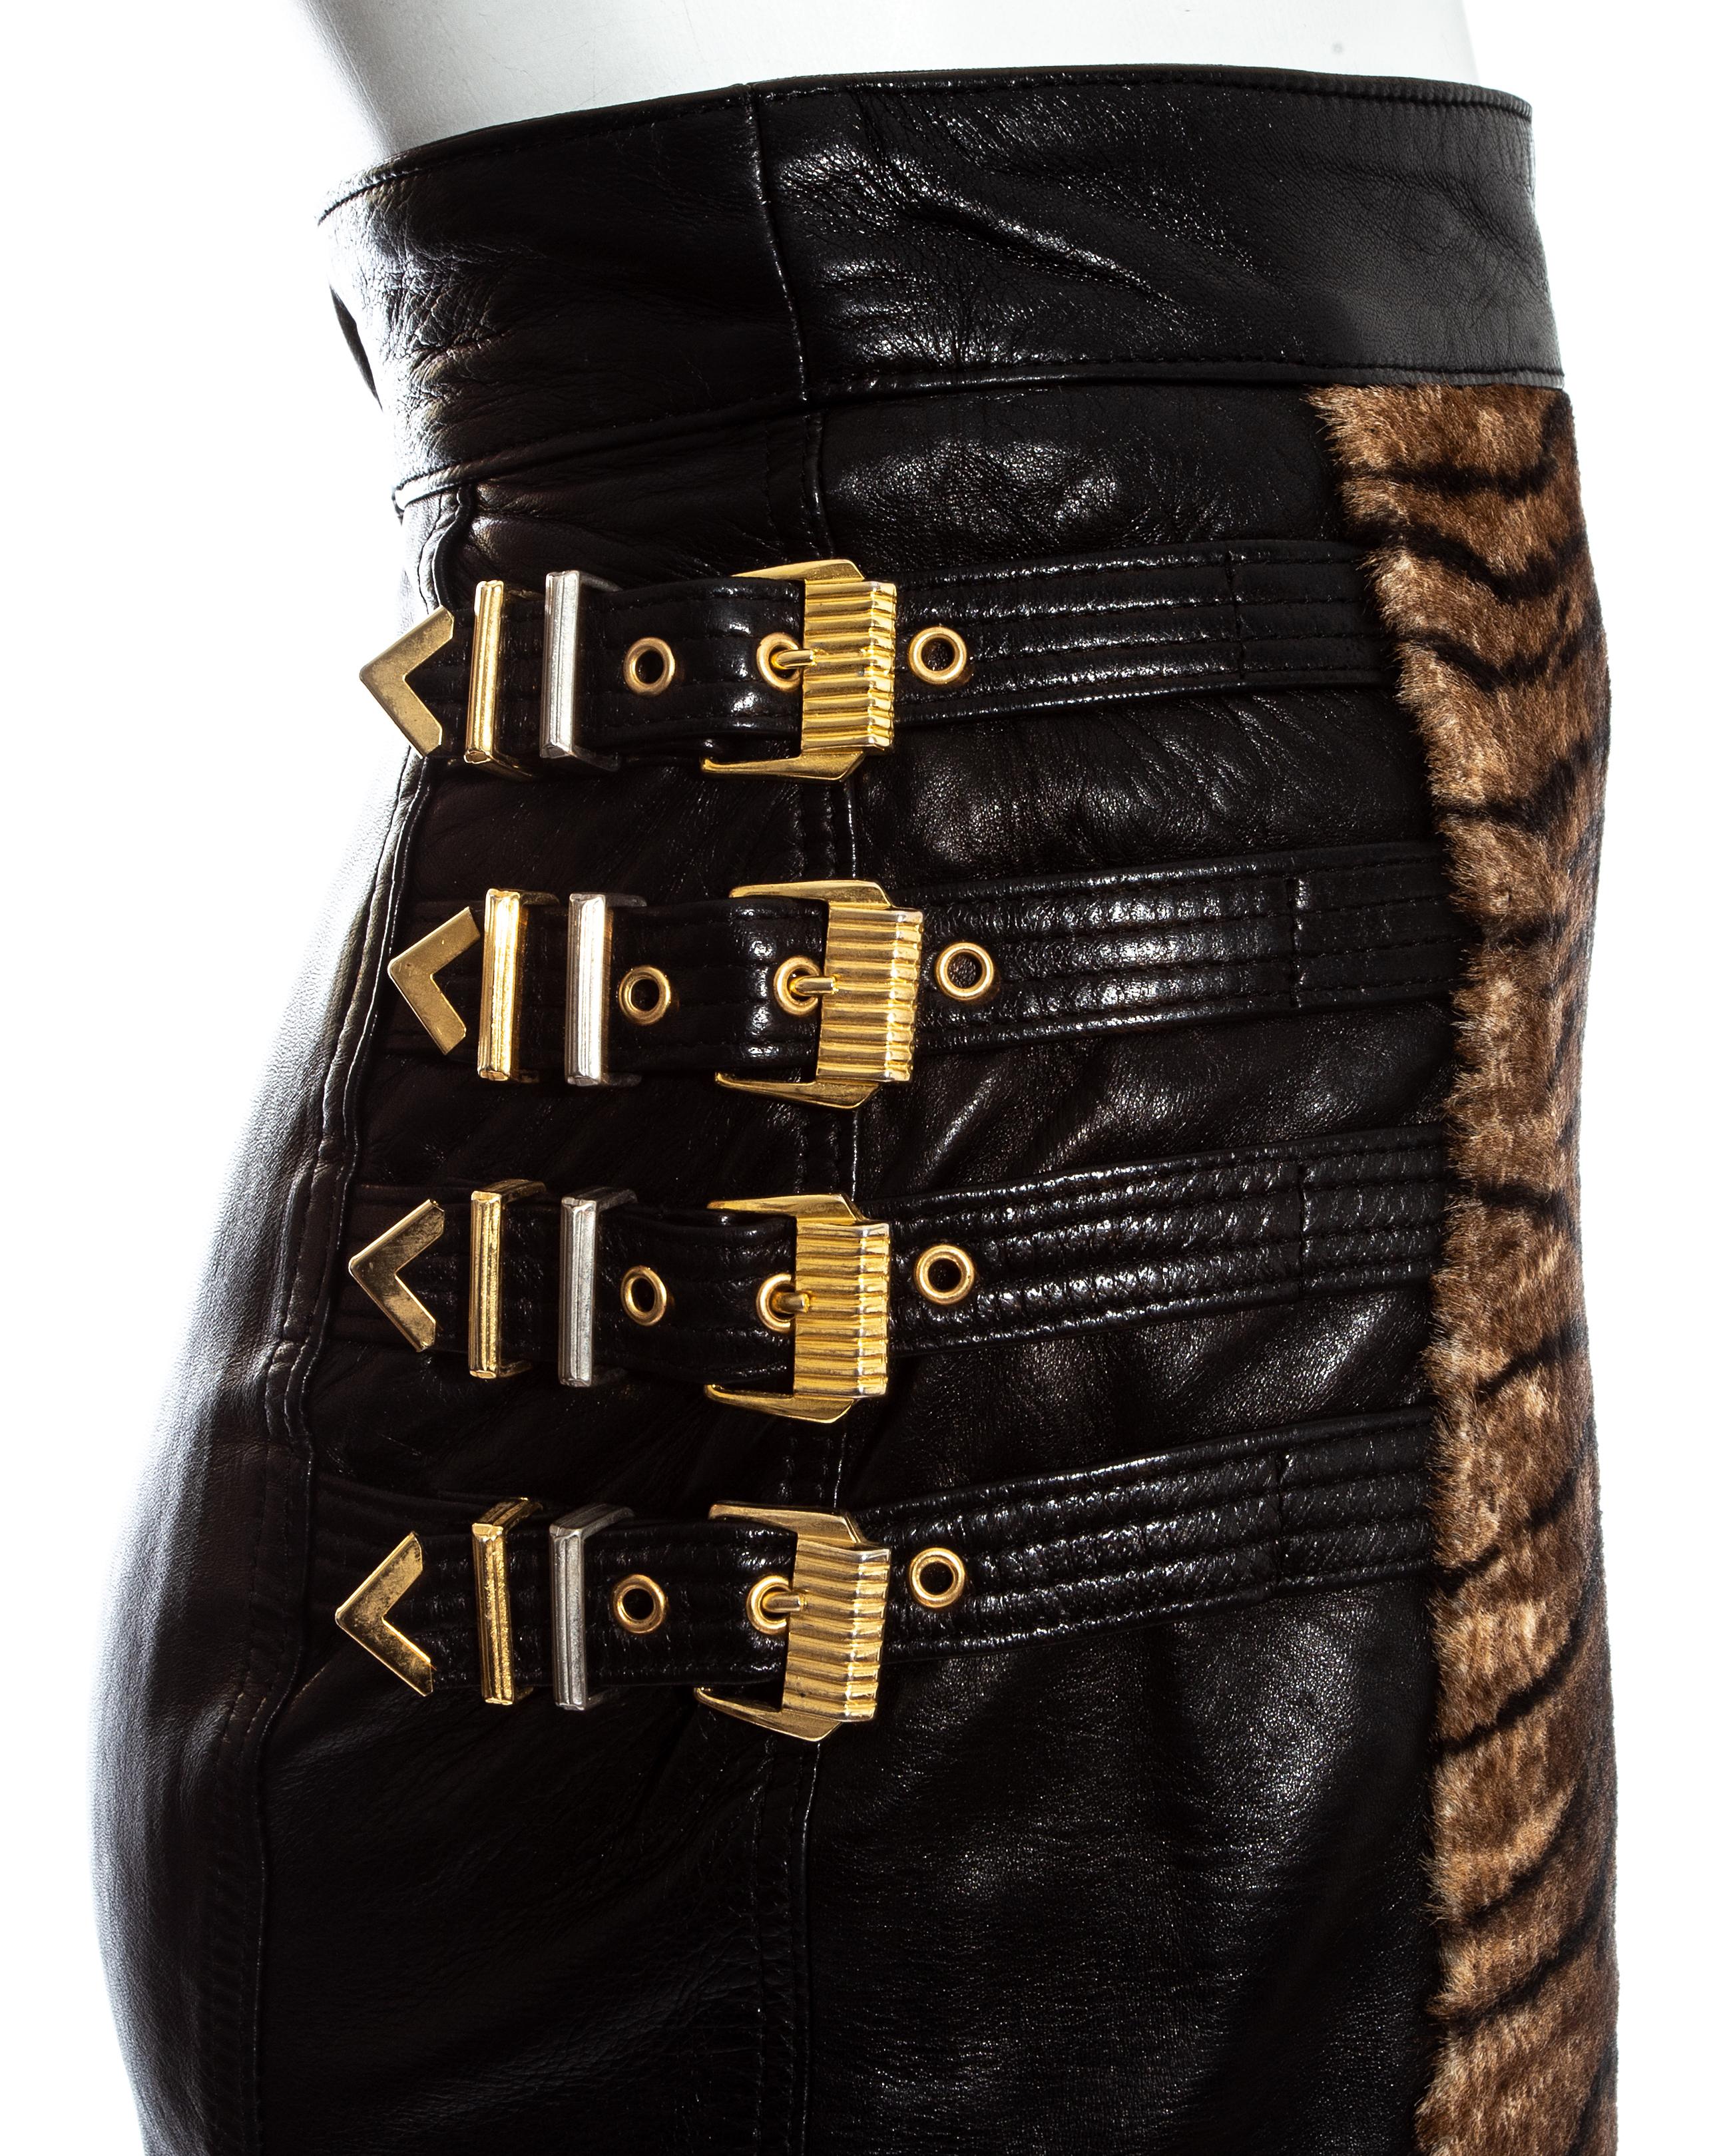 Black Gianni Versace black leather gold buckled skirt with animal print, fw 1994 For Sale